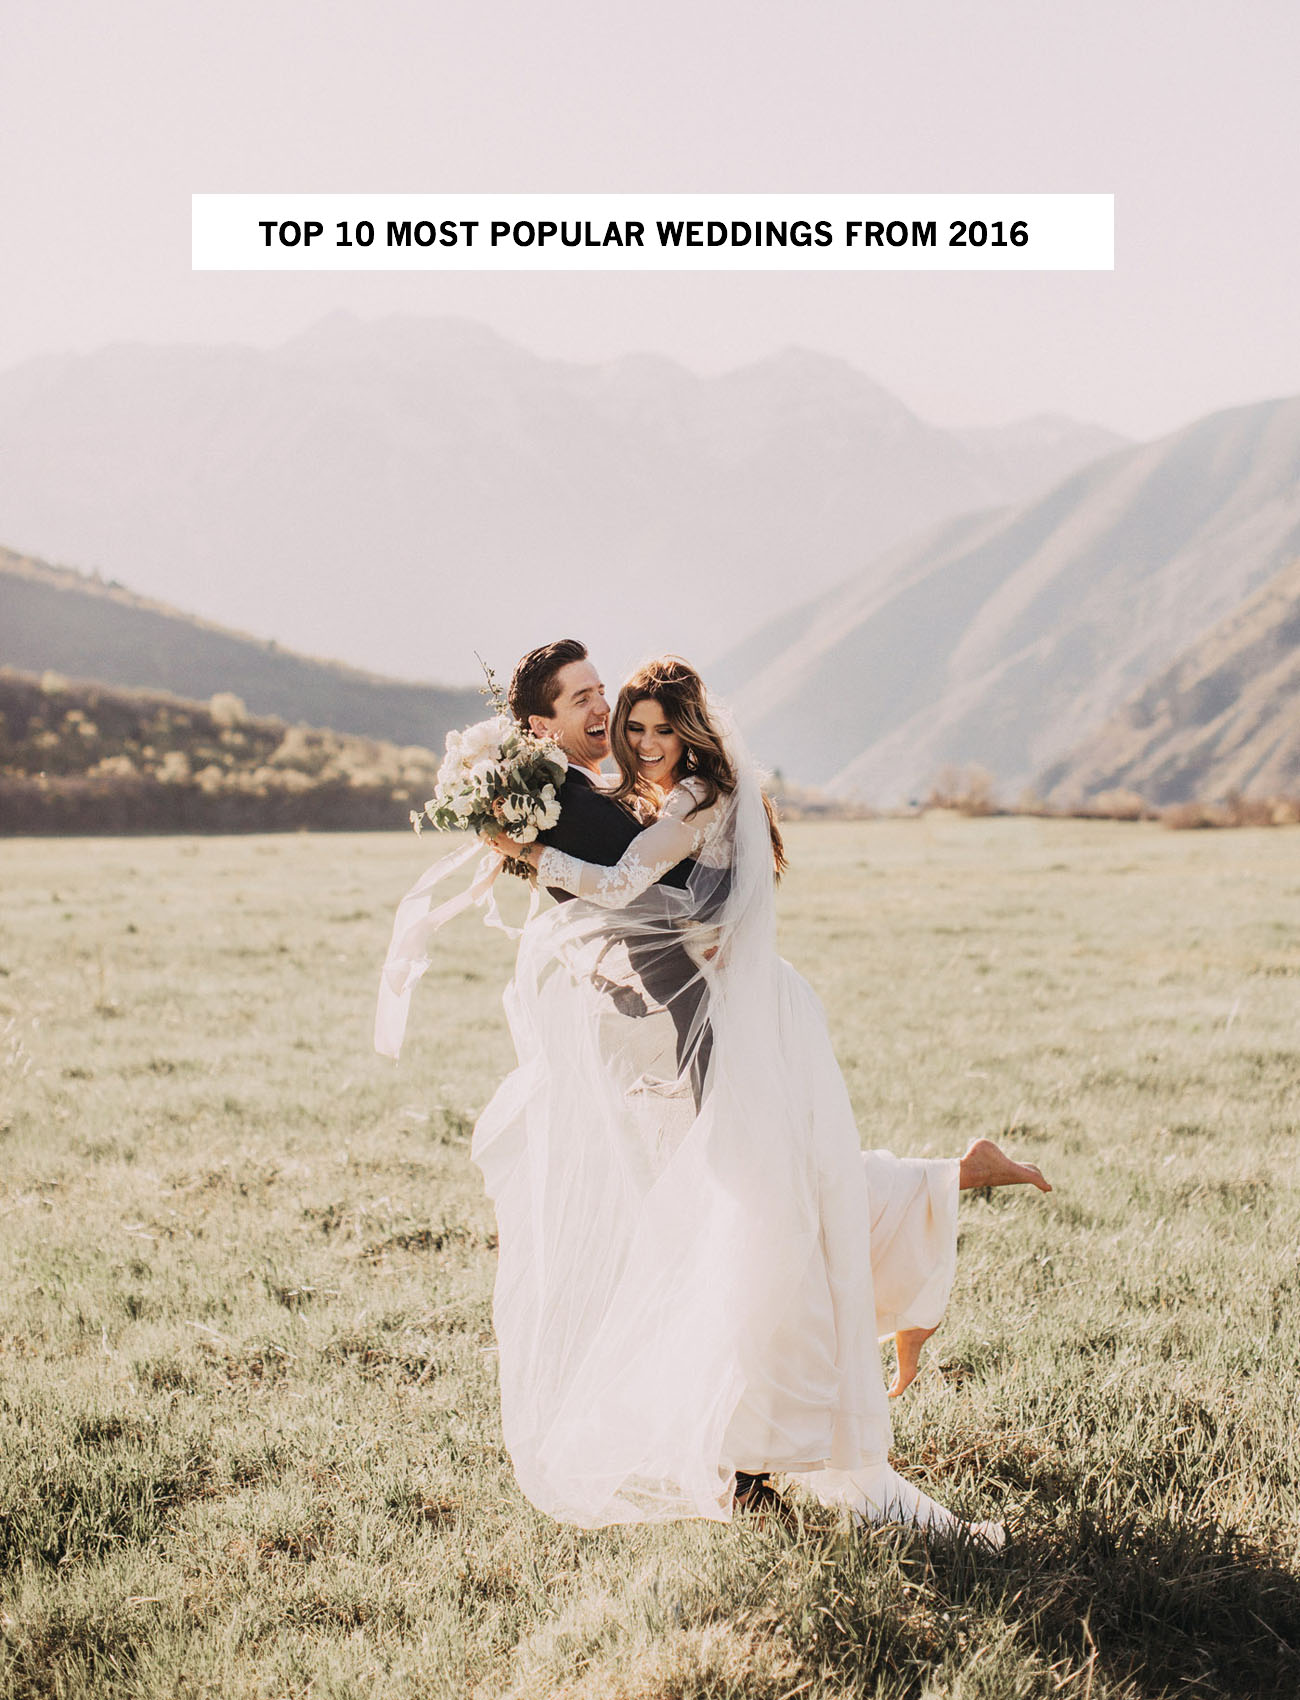 Top 10 Most Popular Weddings from 2016